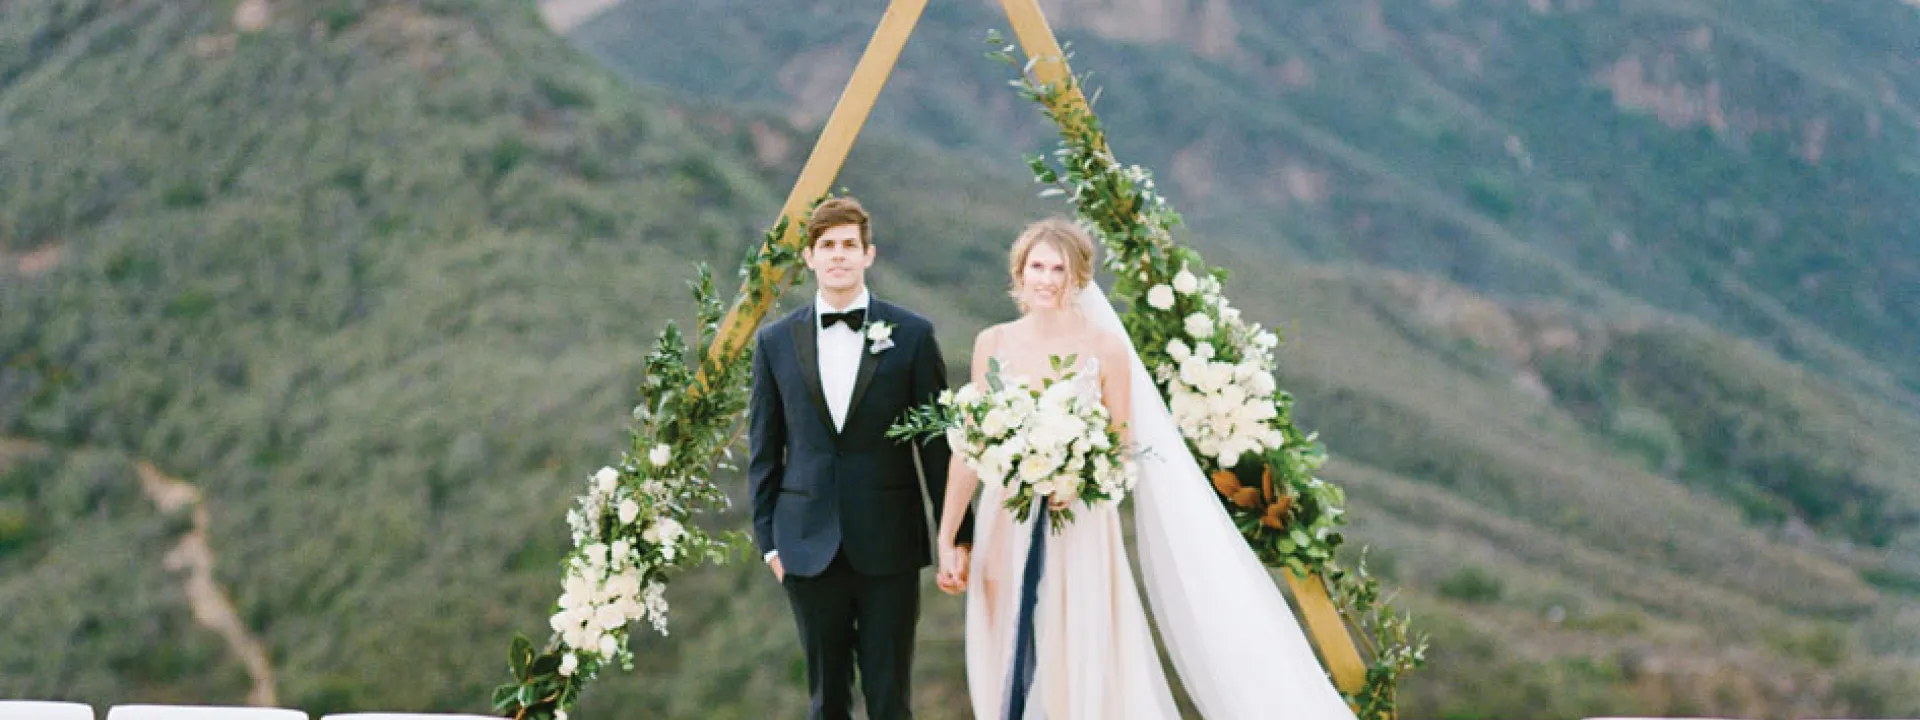 Weddings by Susan Dunne blended soft sage and sapphire blues for a dreamy style